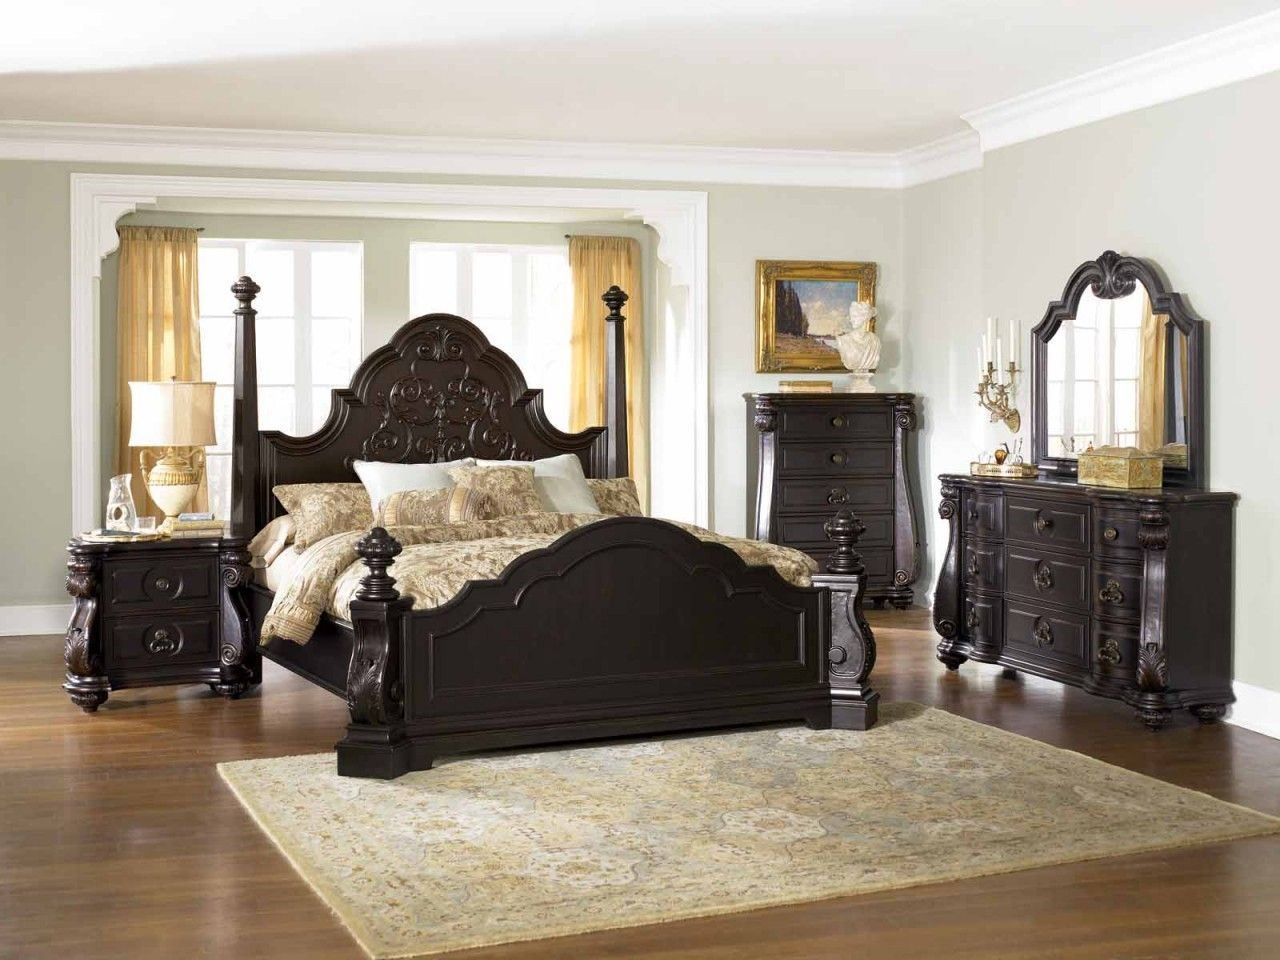 King Size Master Bedroom Sets Buying Guide Amazing Bedroom Decor in dimensions 1280 X 960